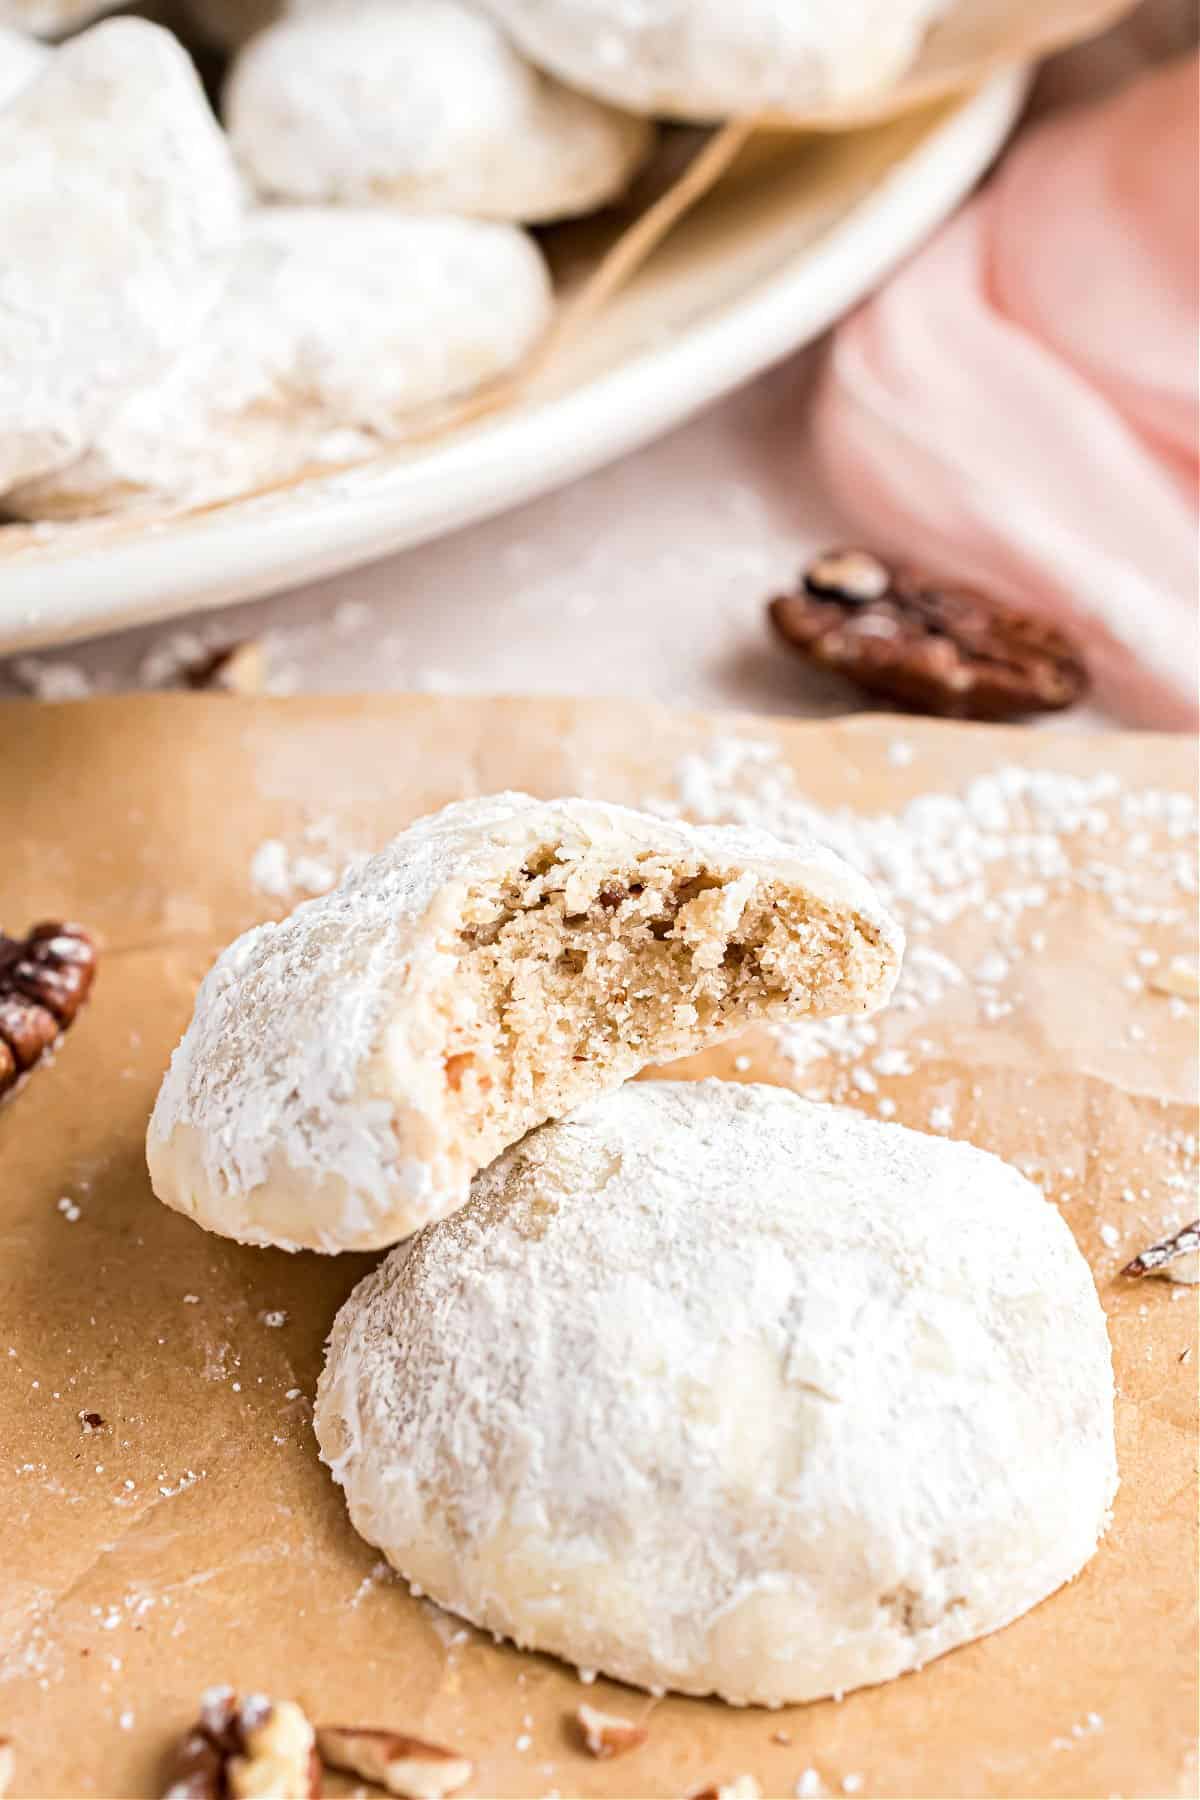 Cookies with powdered sugar on parchment paper, and one bite taken out.